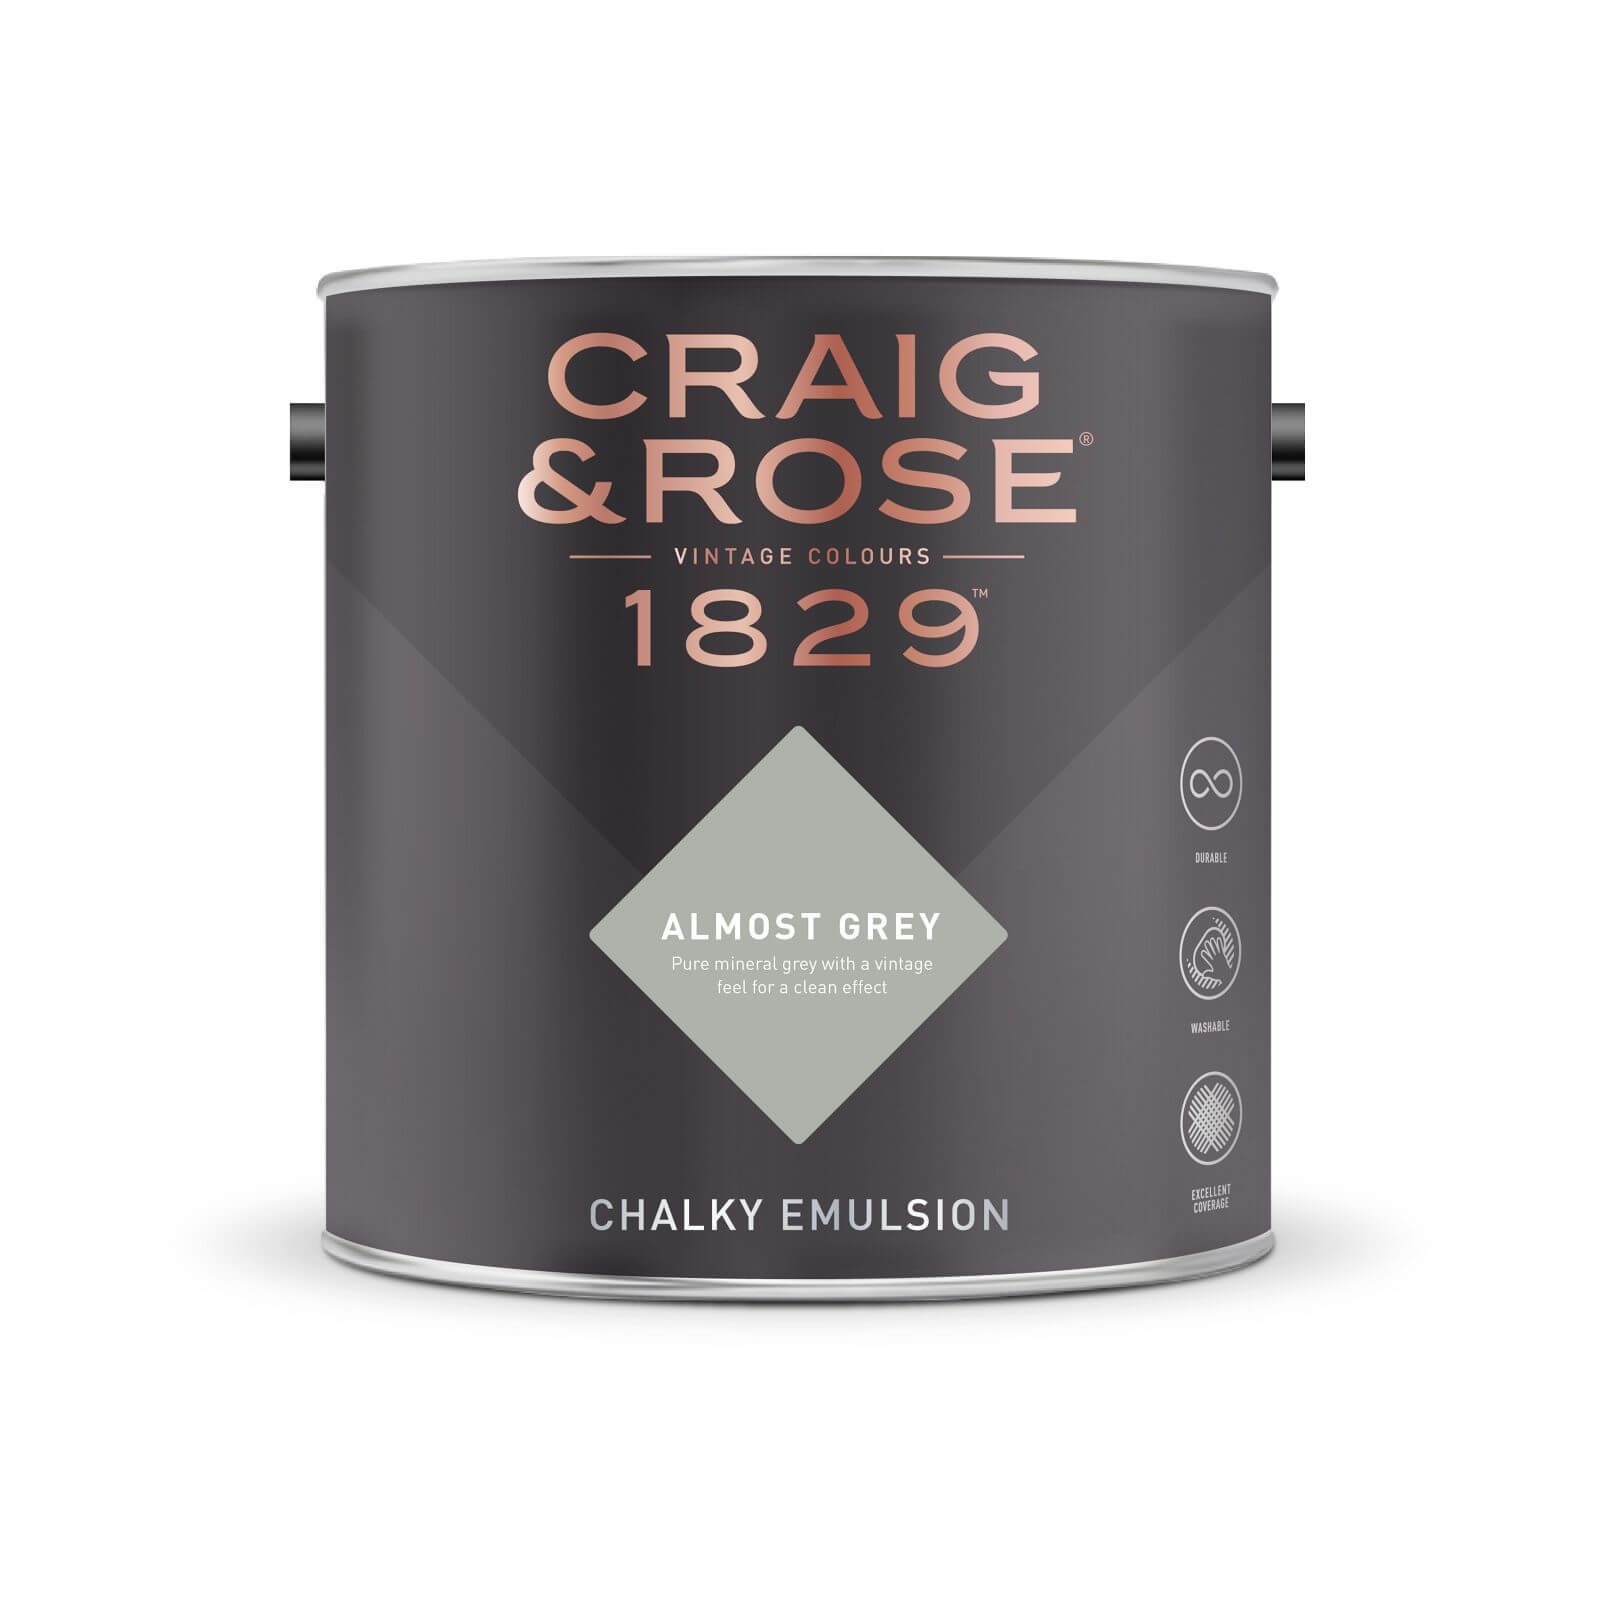 Craig & Rose 1829 Chalky Emulsion Paint Almost Grey - 2.5L